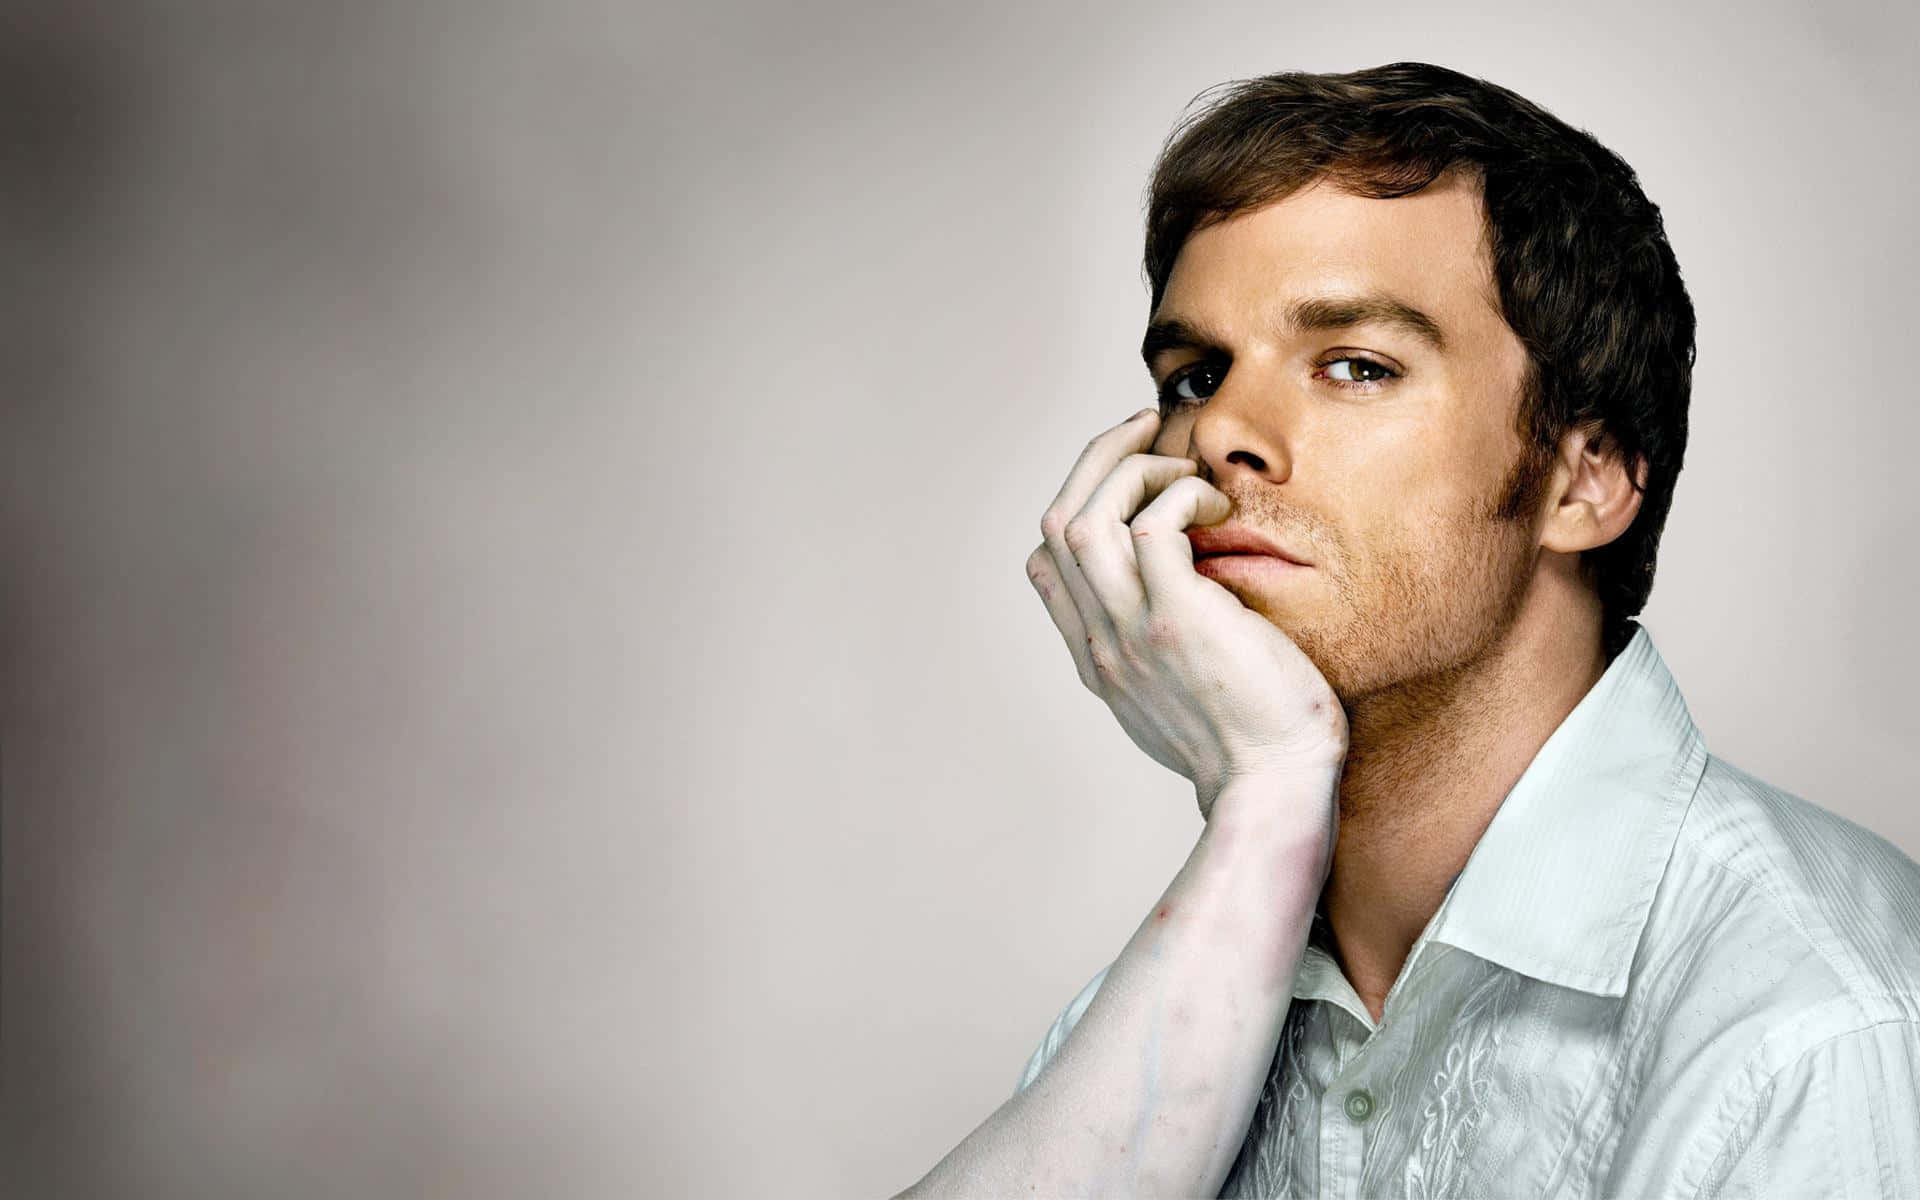 Michael C. Hall in his iconic role as Dexter Morgan Wallpaper